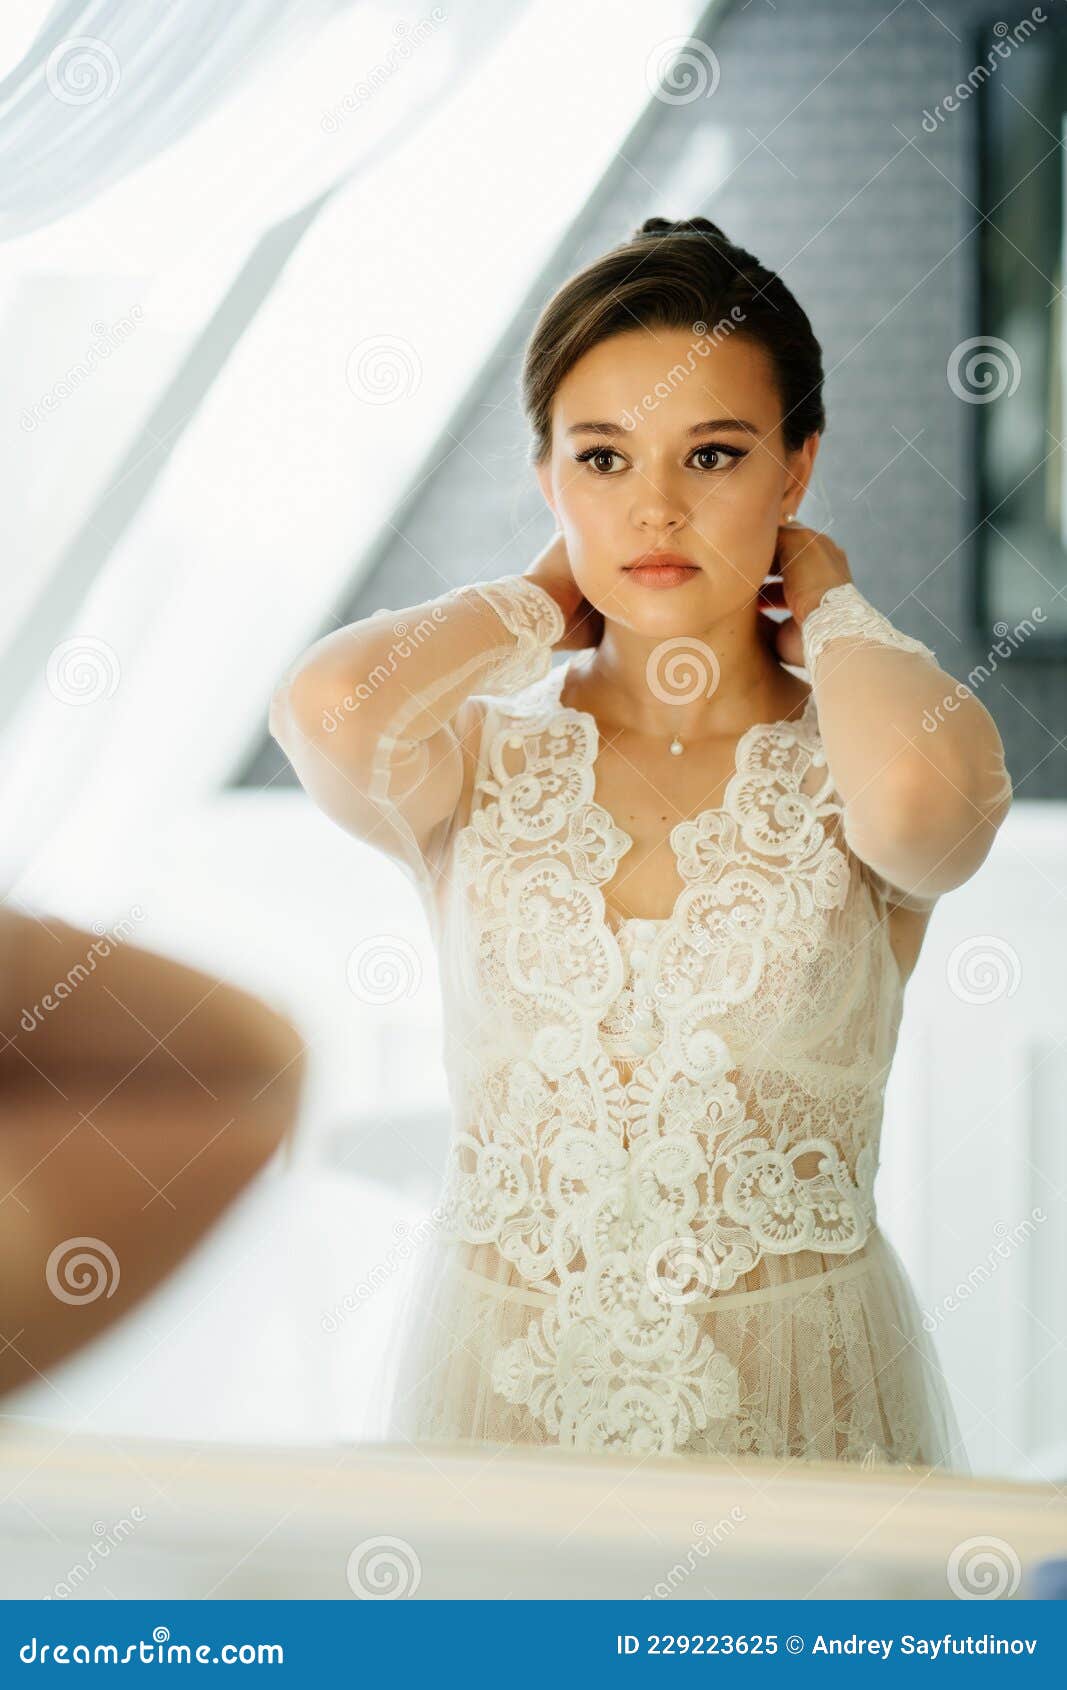 https://thumbs.dreamstime.com/z/beautiful-young-woman-lace-robe-mirror-sexy-home-clothes-outfit-wedding-night-bathroom-interior-design-retro-style-229223625.jpg